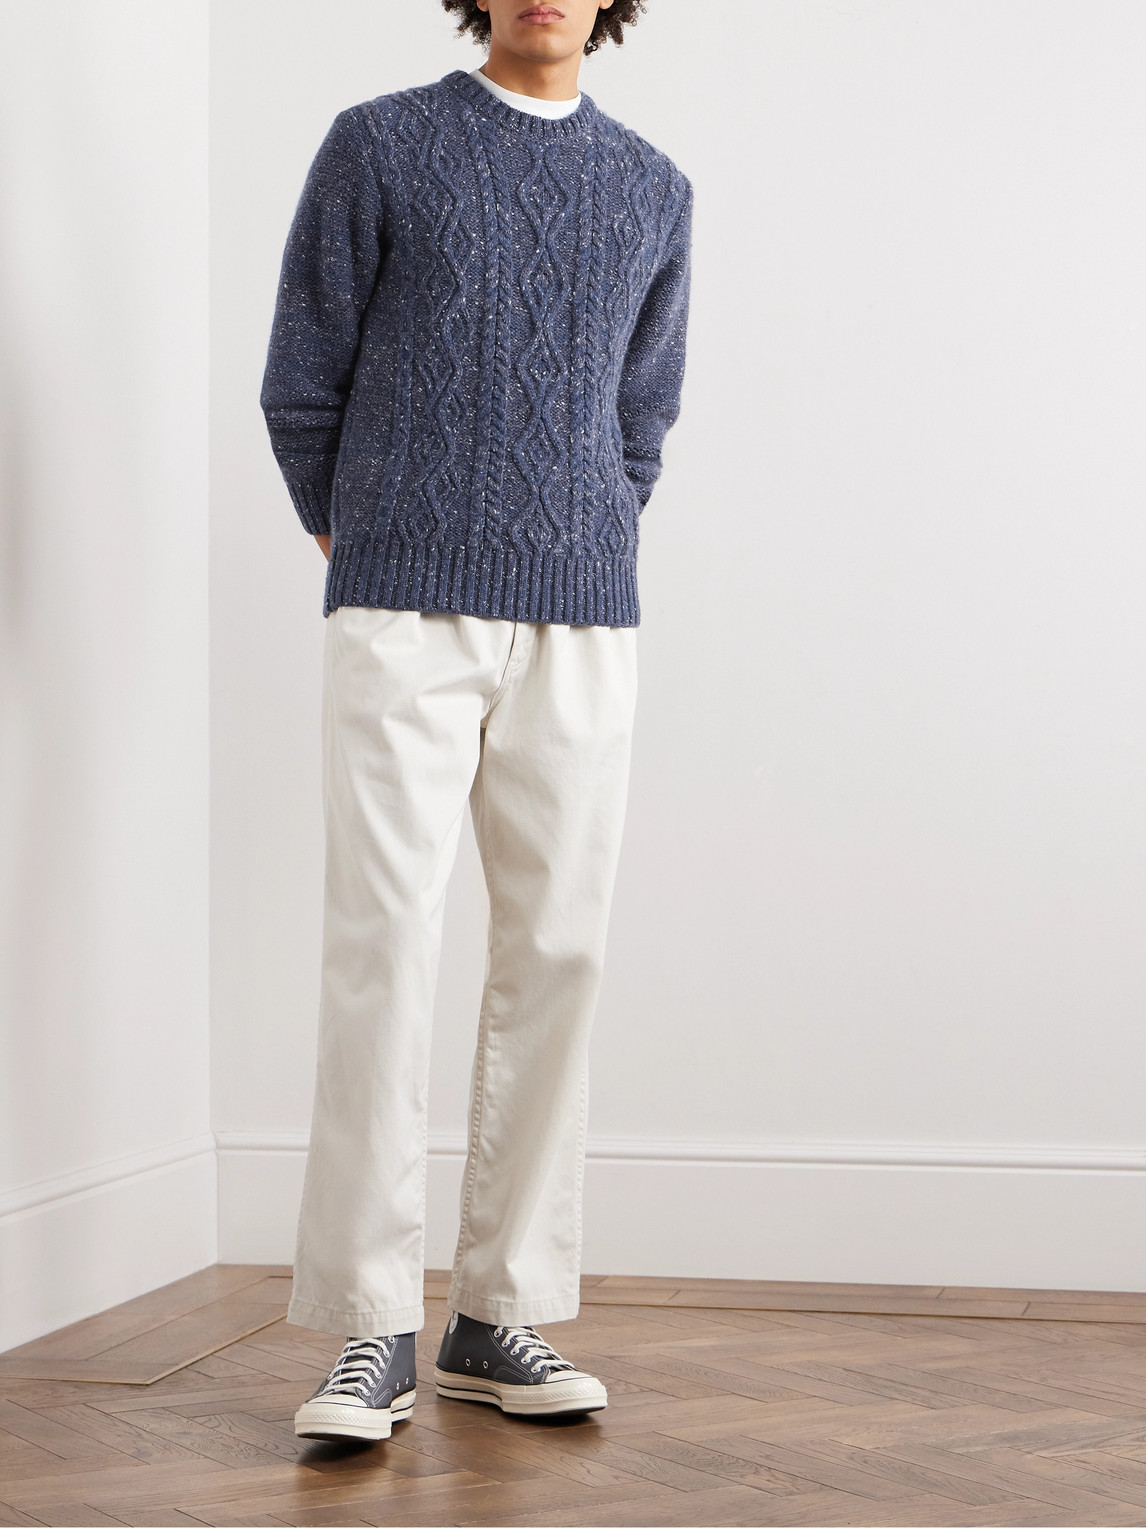 Shop Inis Meain Aran Cable-knit Cashmere Sweater In Blue